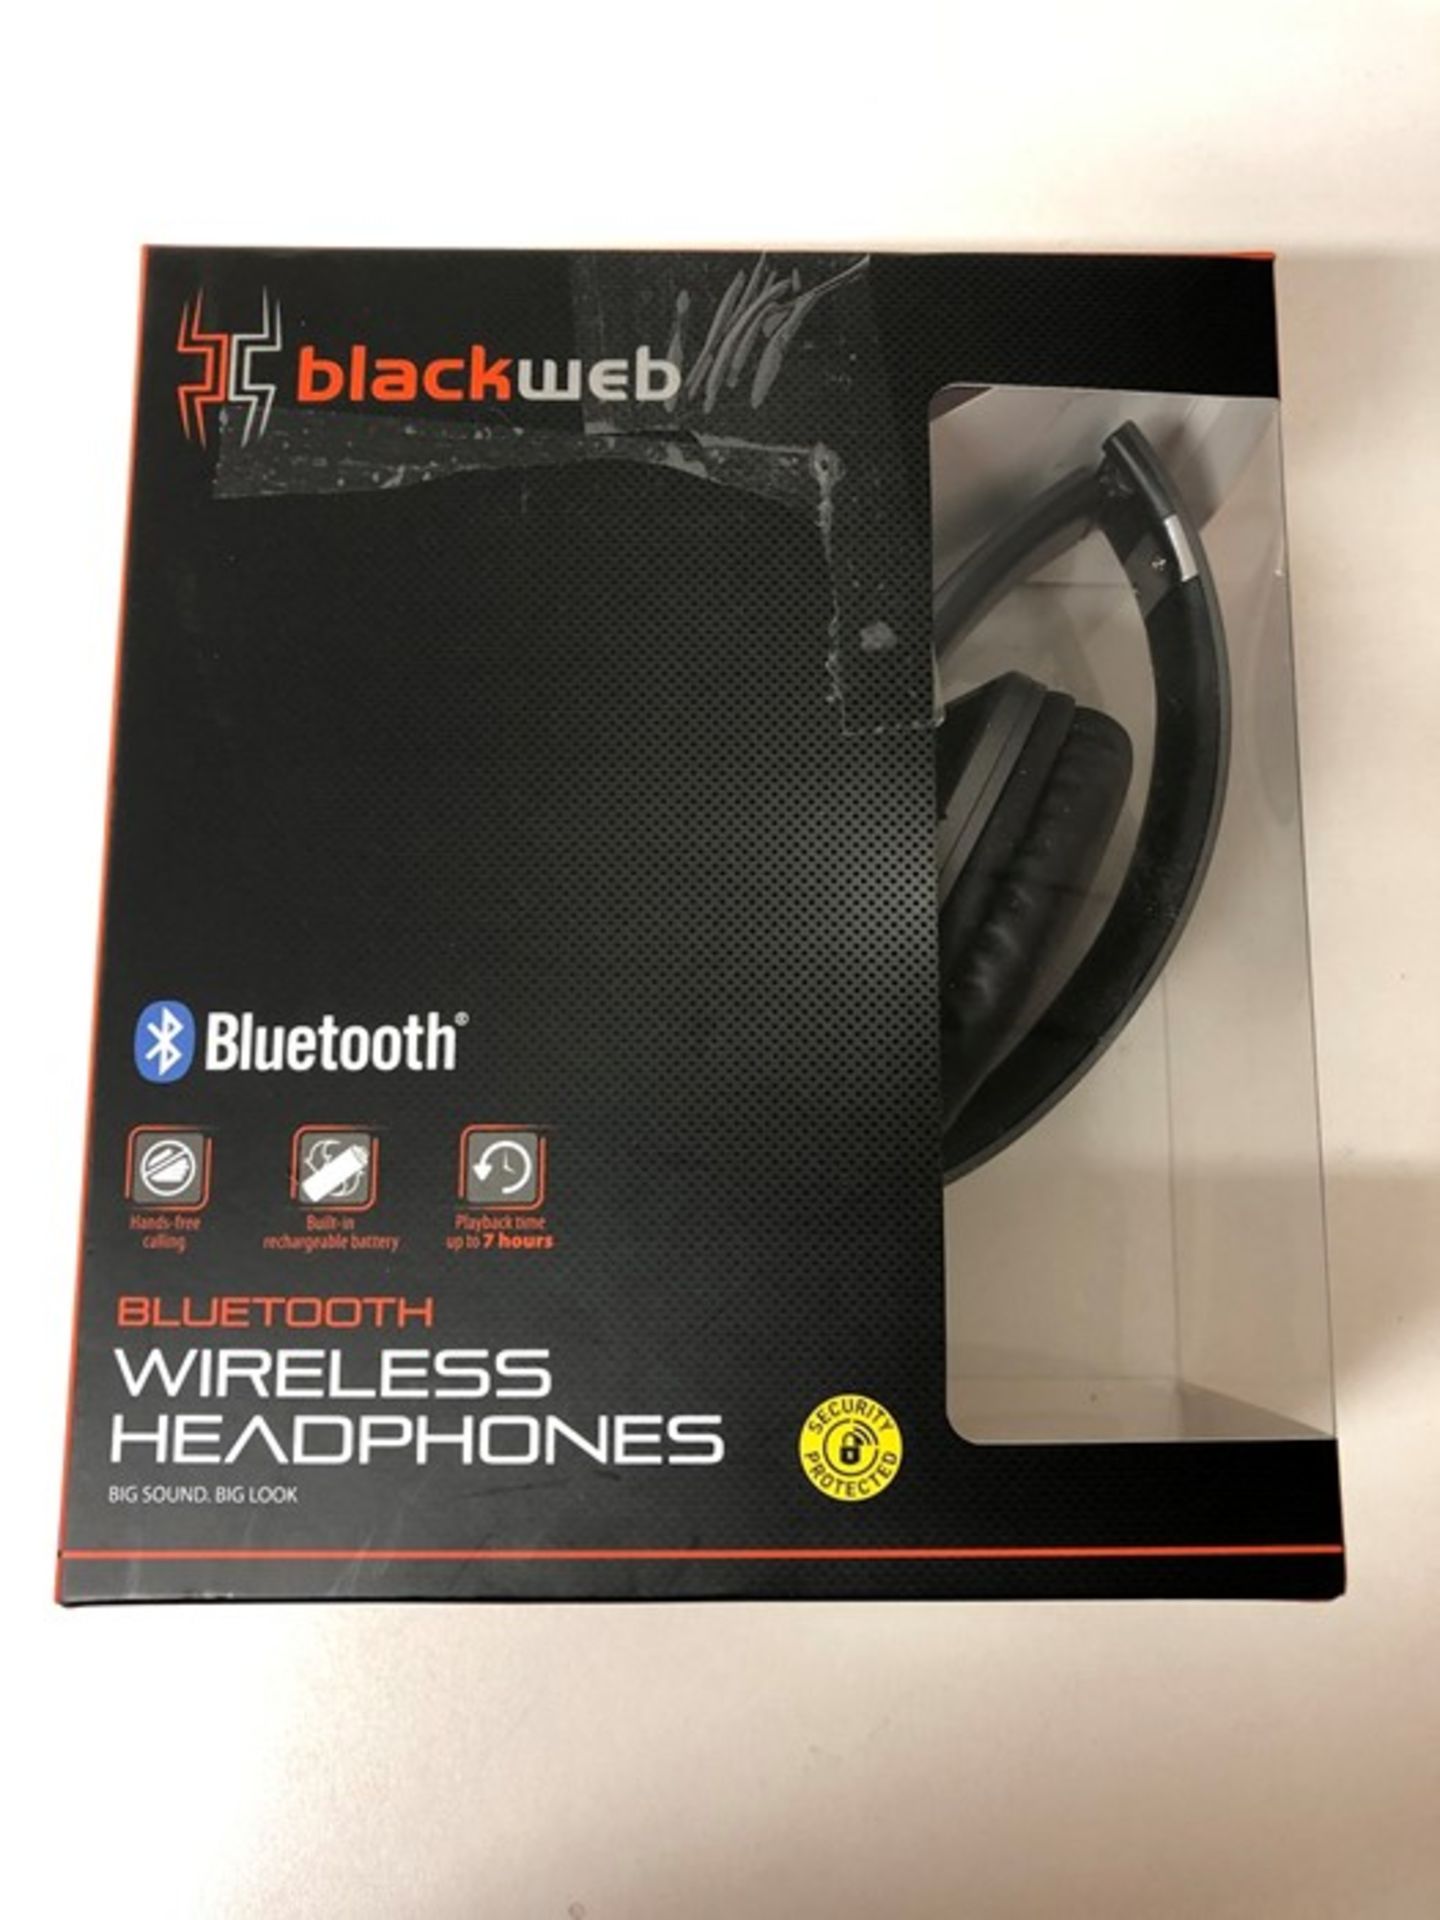 1 BOXED BLACK WEB BLUETOOTH WIRELESS HEADPHONES IN GREY AND BLACK / RRP £20.00 - BL 3809 (VIEWING